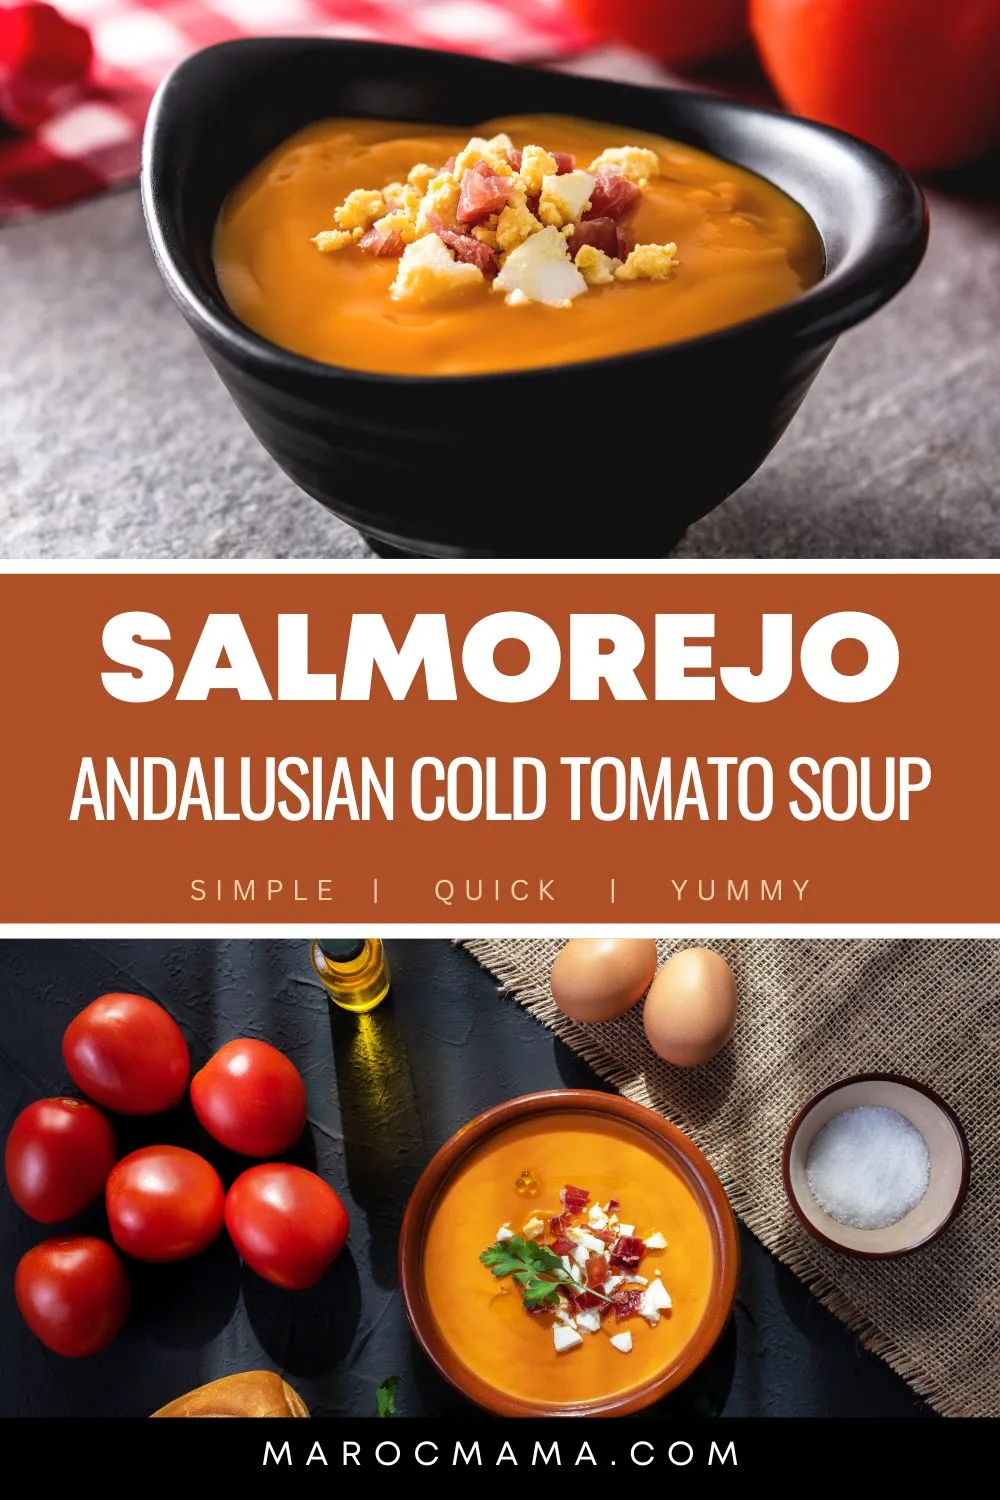 Earthenware bowl with Spanish salmorejo, tomatoes and a bottle of olive oil on a wooden table with the text Salmorejo Andalusian Cold Tomato Soup